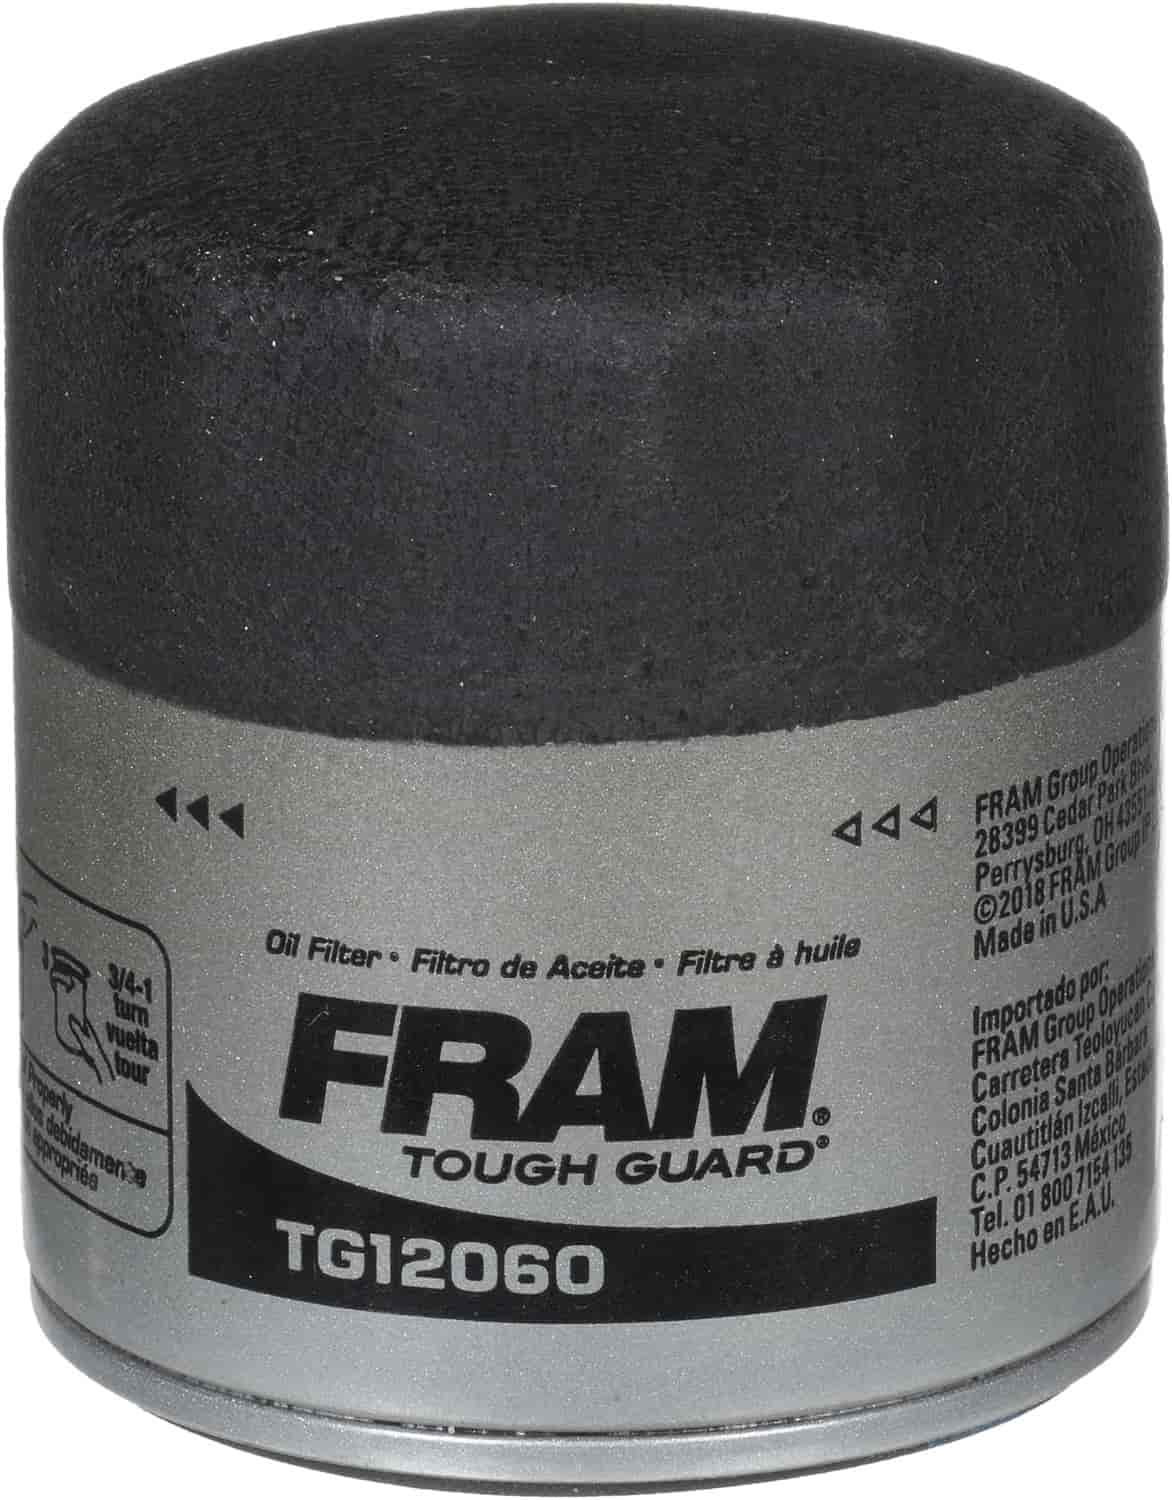 Tough Guard Oil Filter for Select 2012-Late GM Models Thread Size: M22 x 1.5 mm